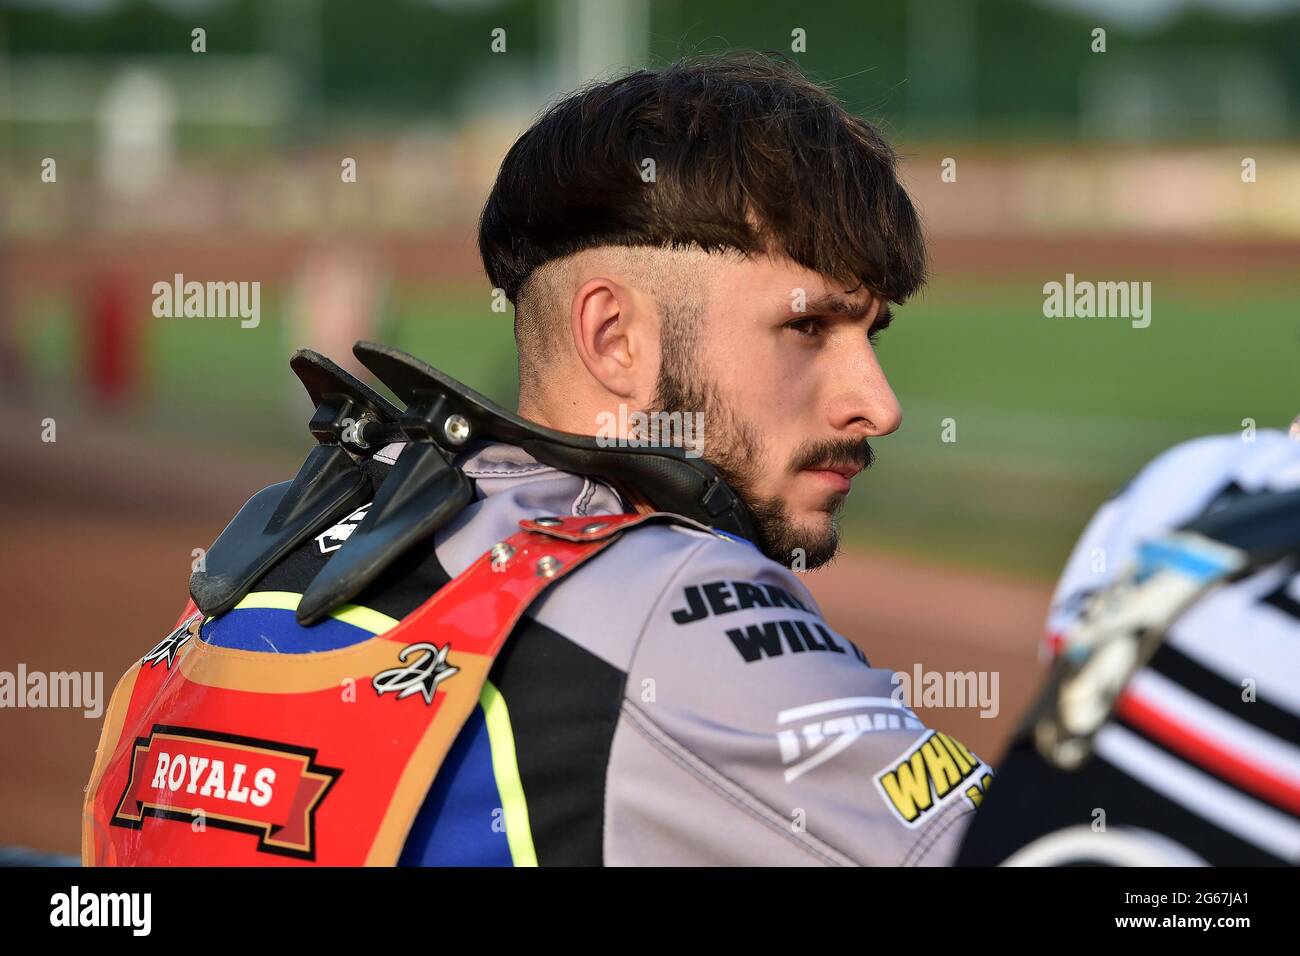 MANCHESTER, UK. JULY 2ND Jacob Clouting of Kent Royalsduring the National Development League match between Belle Vue Aces and Kent Royals at the National Speedway Stadium, Manchester on Friday 2nd July 2021. (Credit: Eddie Garvey | MI News) Stock Photo